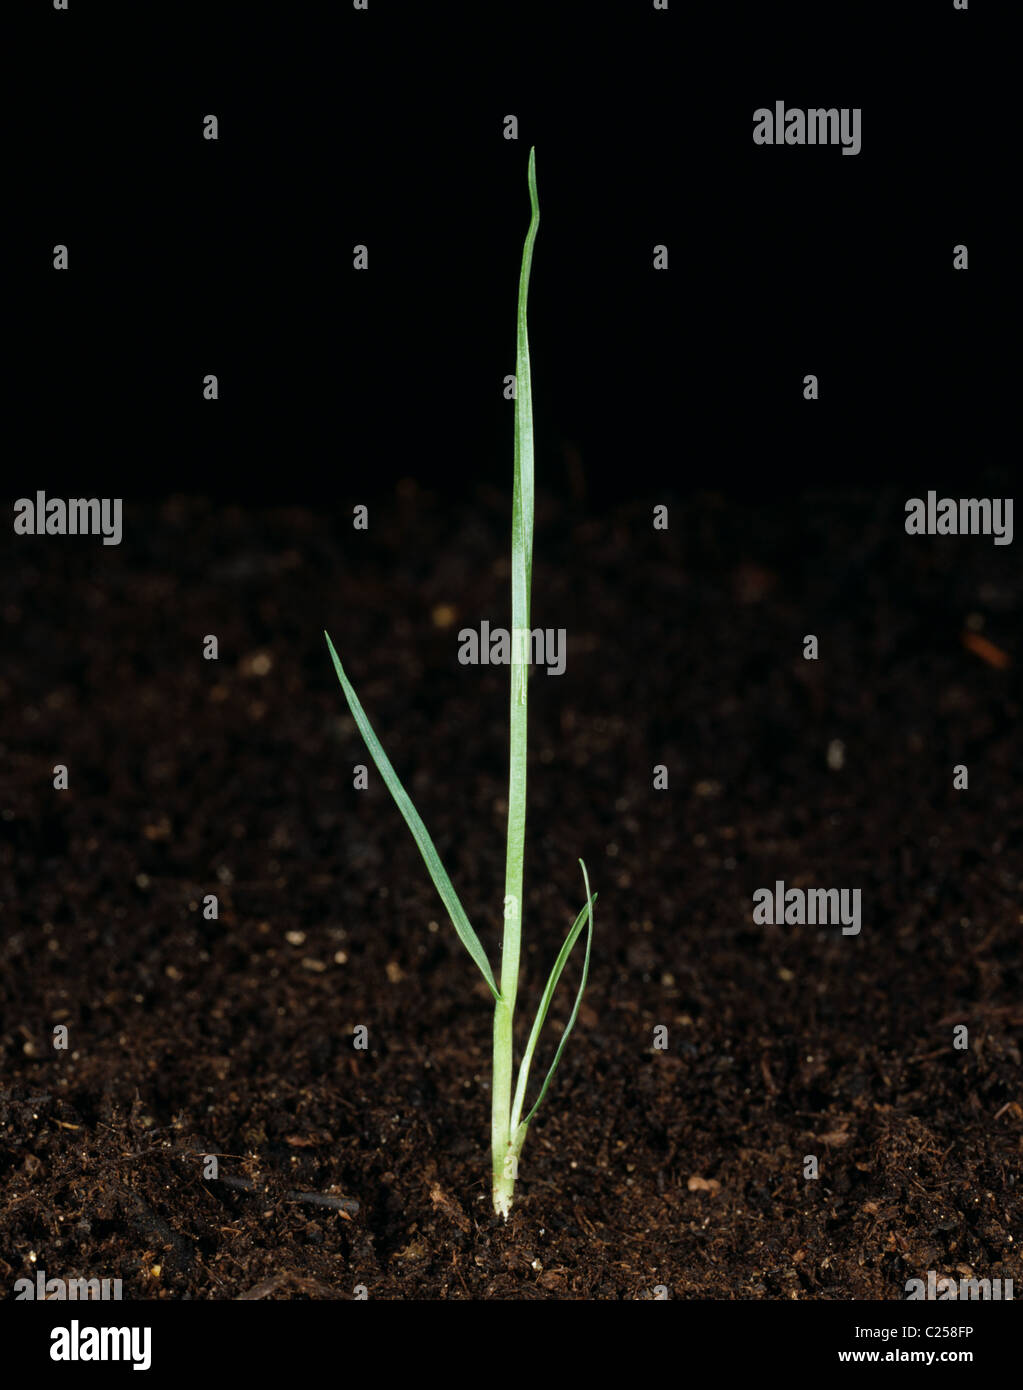 Rough-stalked meadow grass (Poa trivialis) seedling plant just beginning to tiller Stock Photo